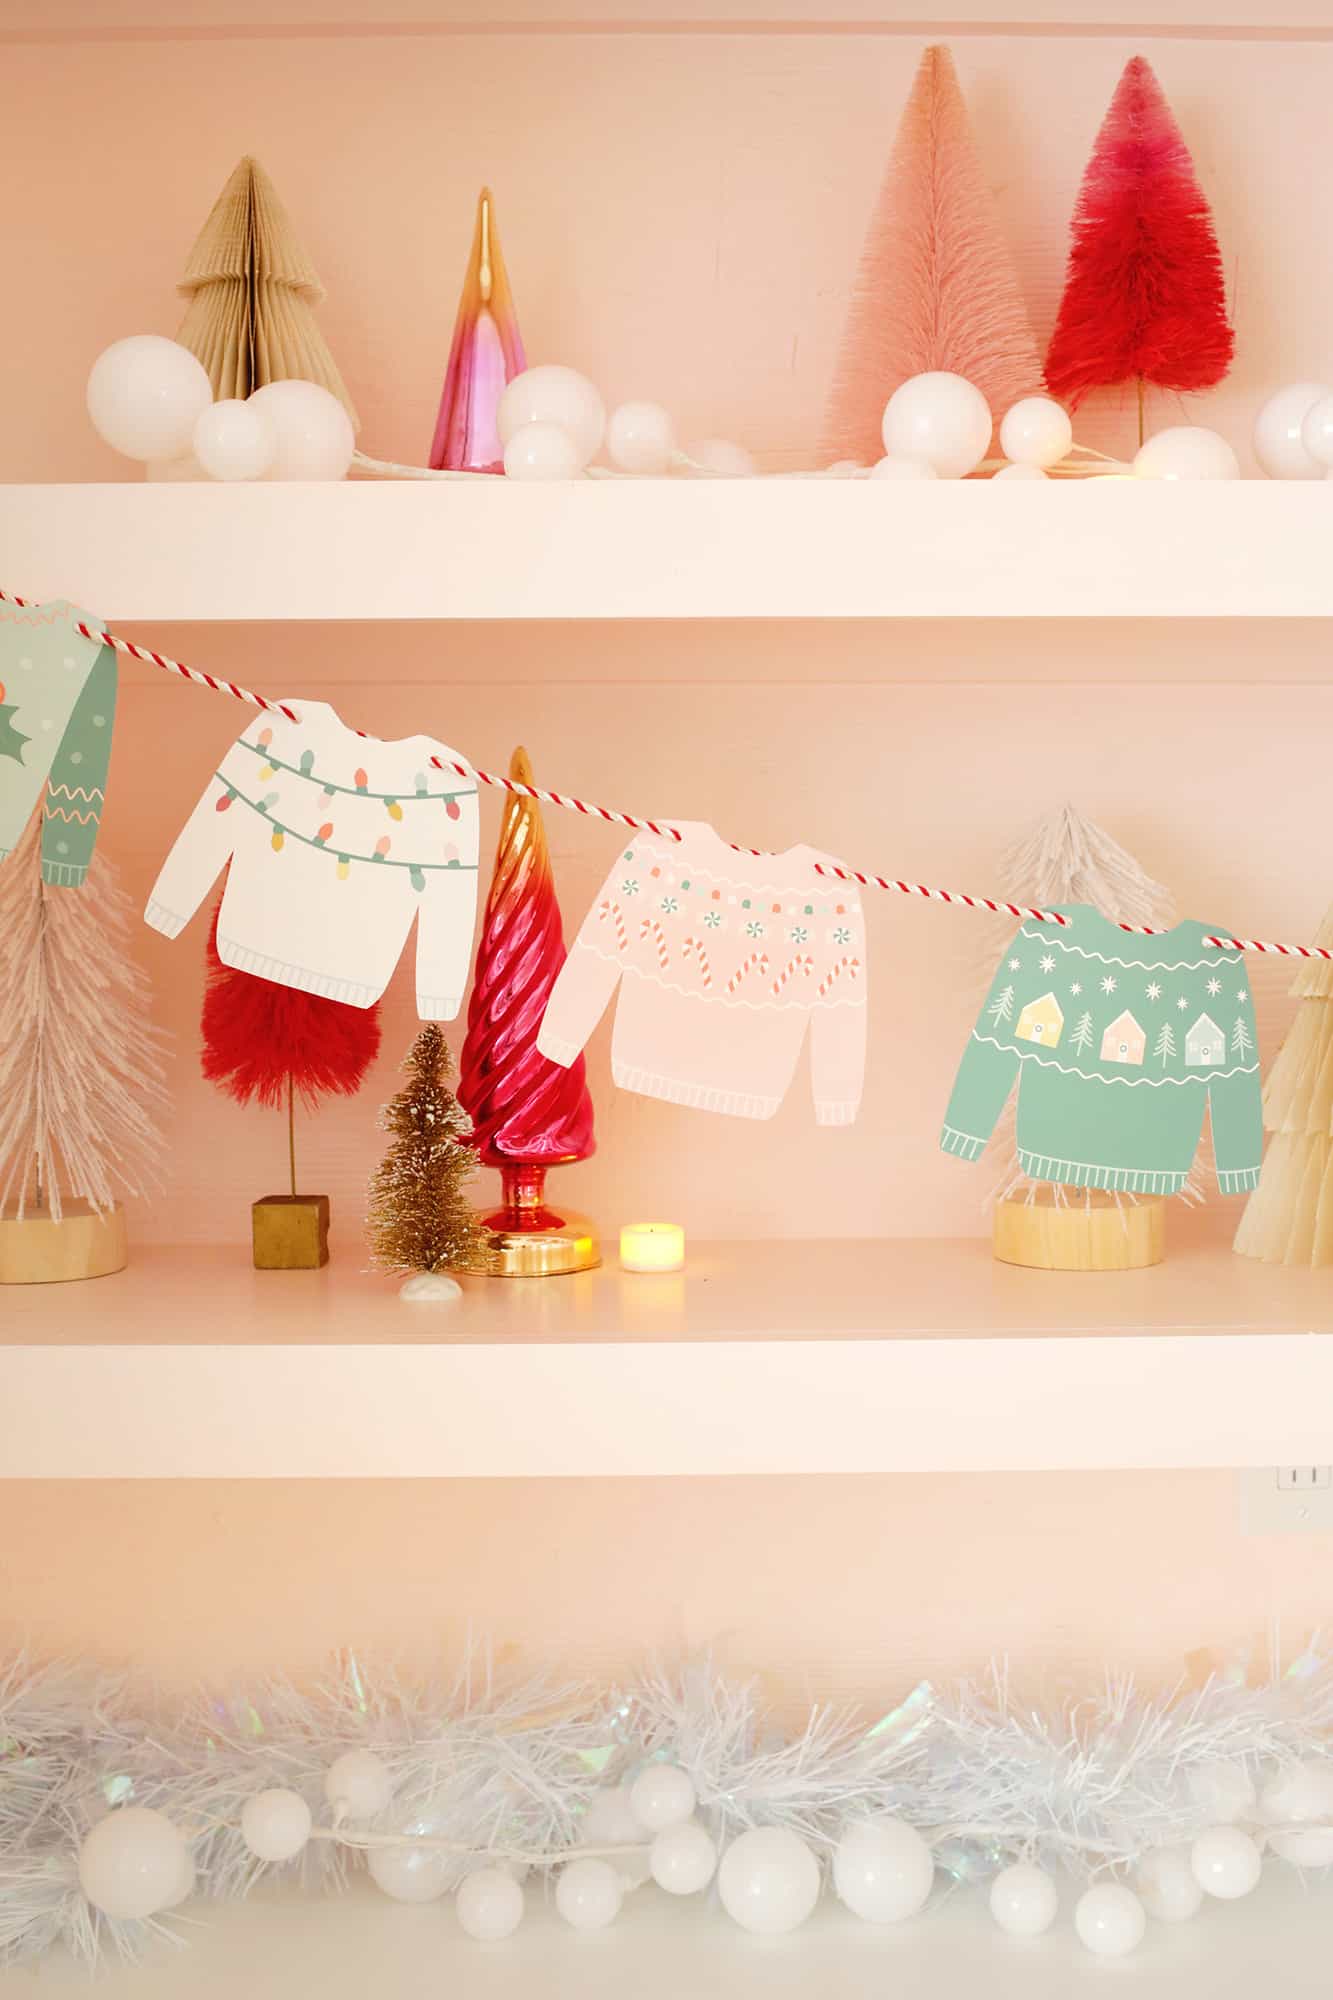 Paper Christmas sweaters strung on a garland with Christmas tree shelf decor